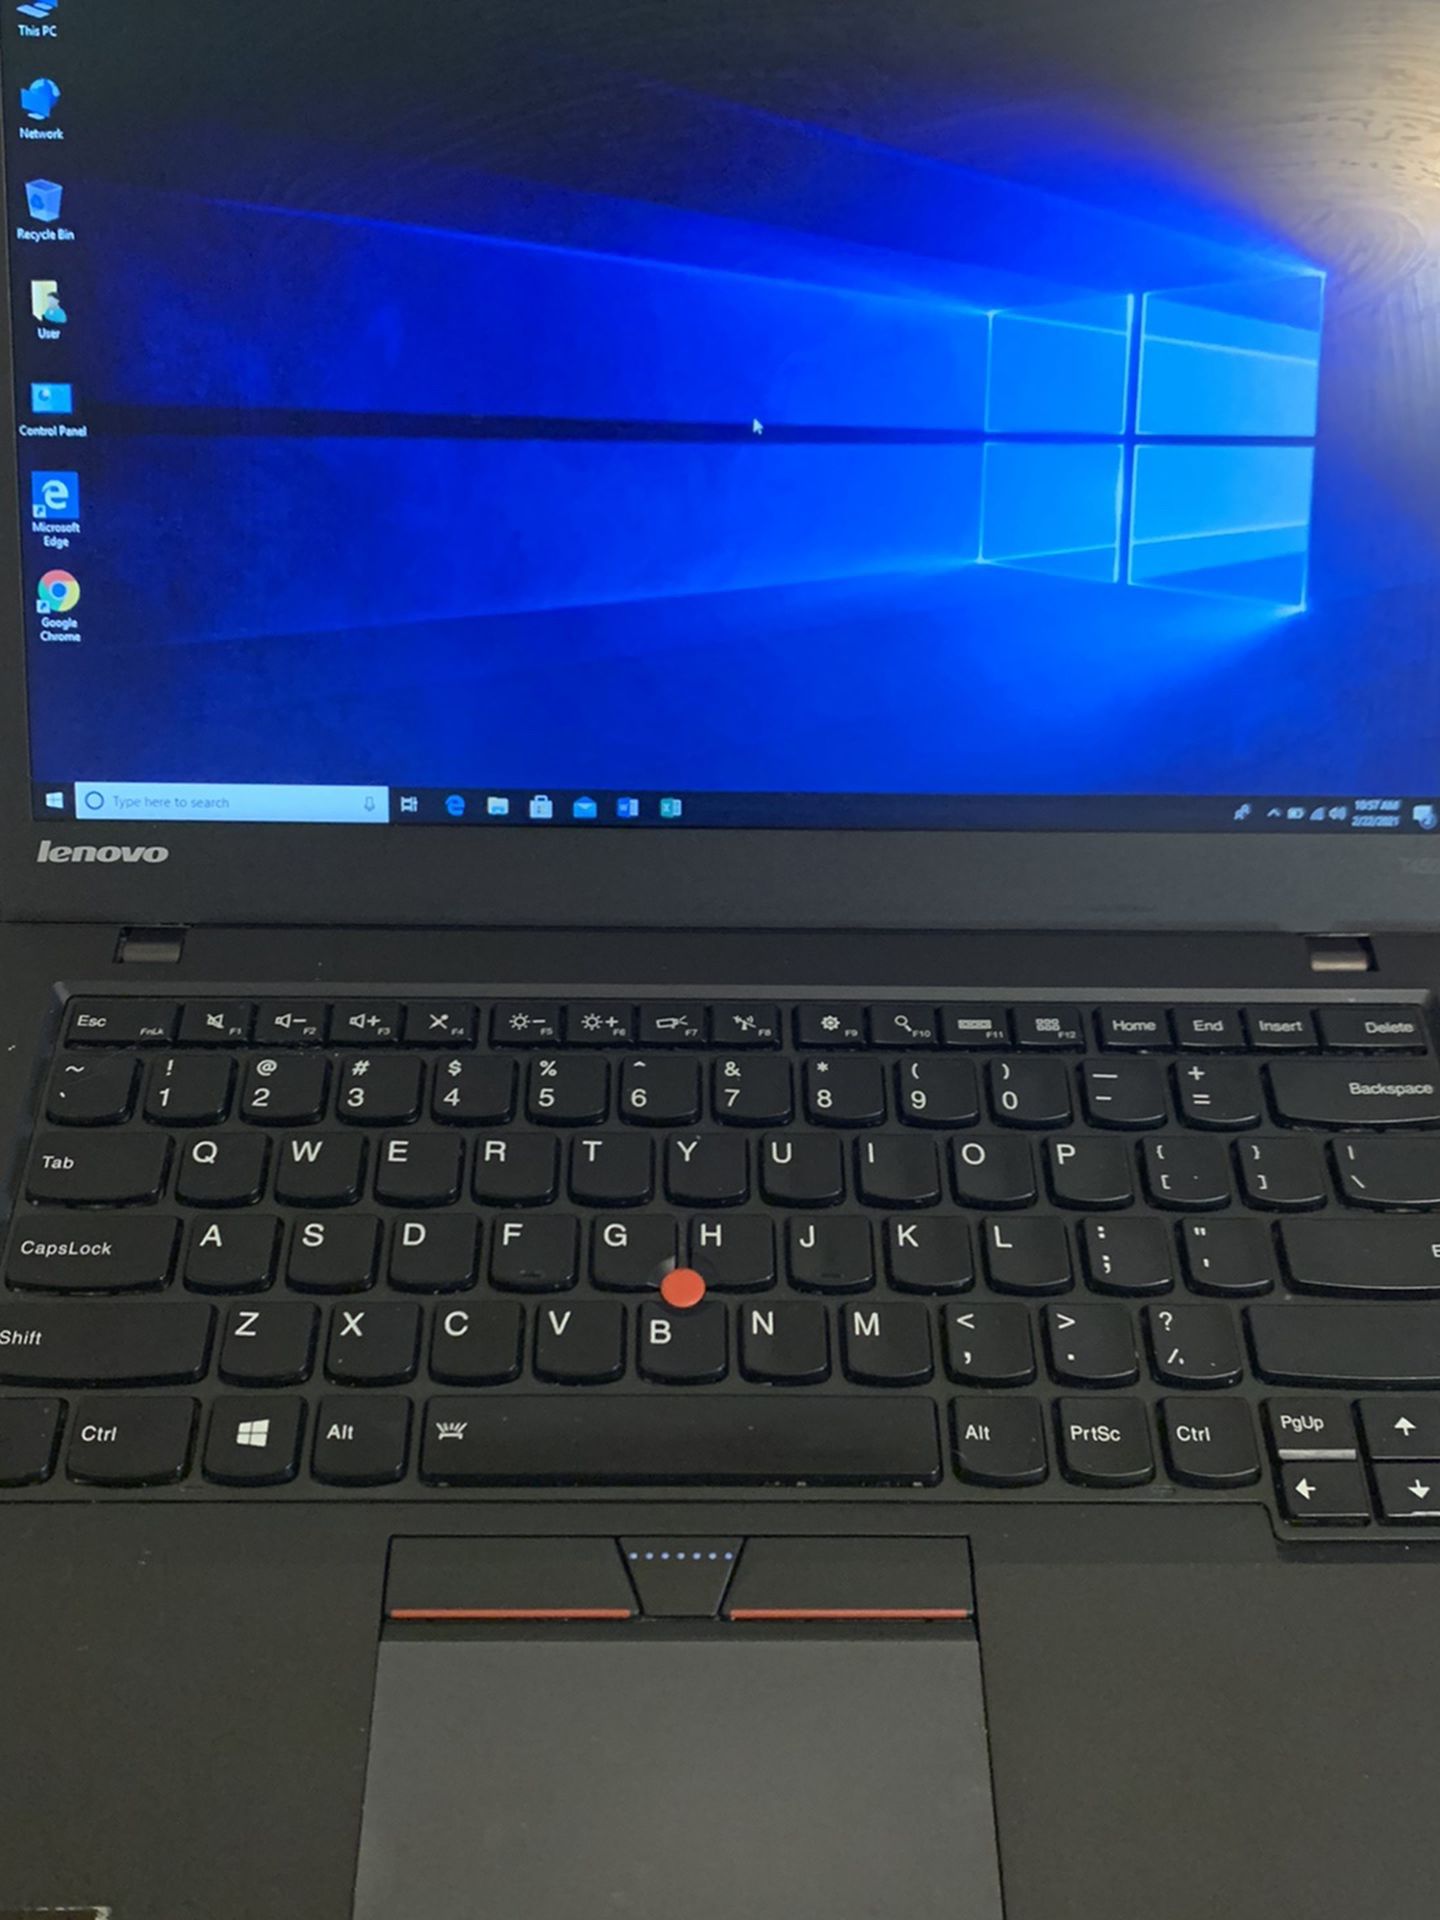 “LENOVO T440s” powerful laptop Intel core (TM) i5-4600U CPU @ 2.10 GHz 2.69 GHz , 8 GB RAM,256 SSD with fully installed/ licensed Windows 10 and packa